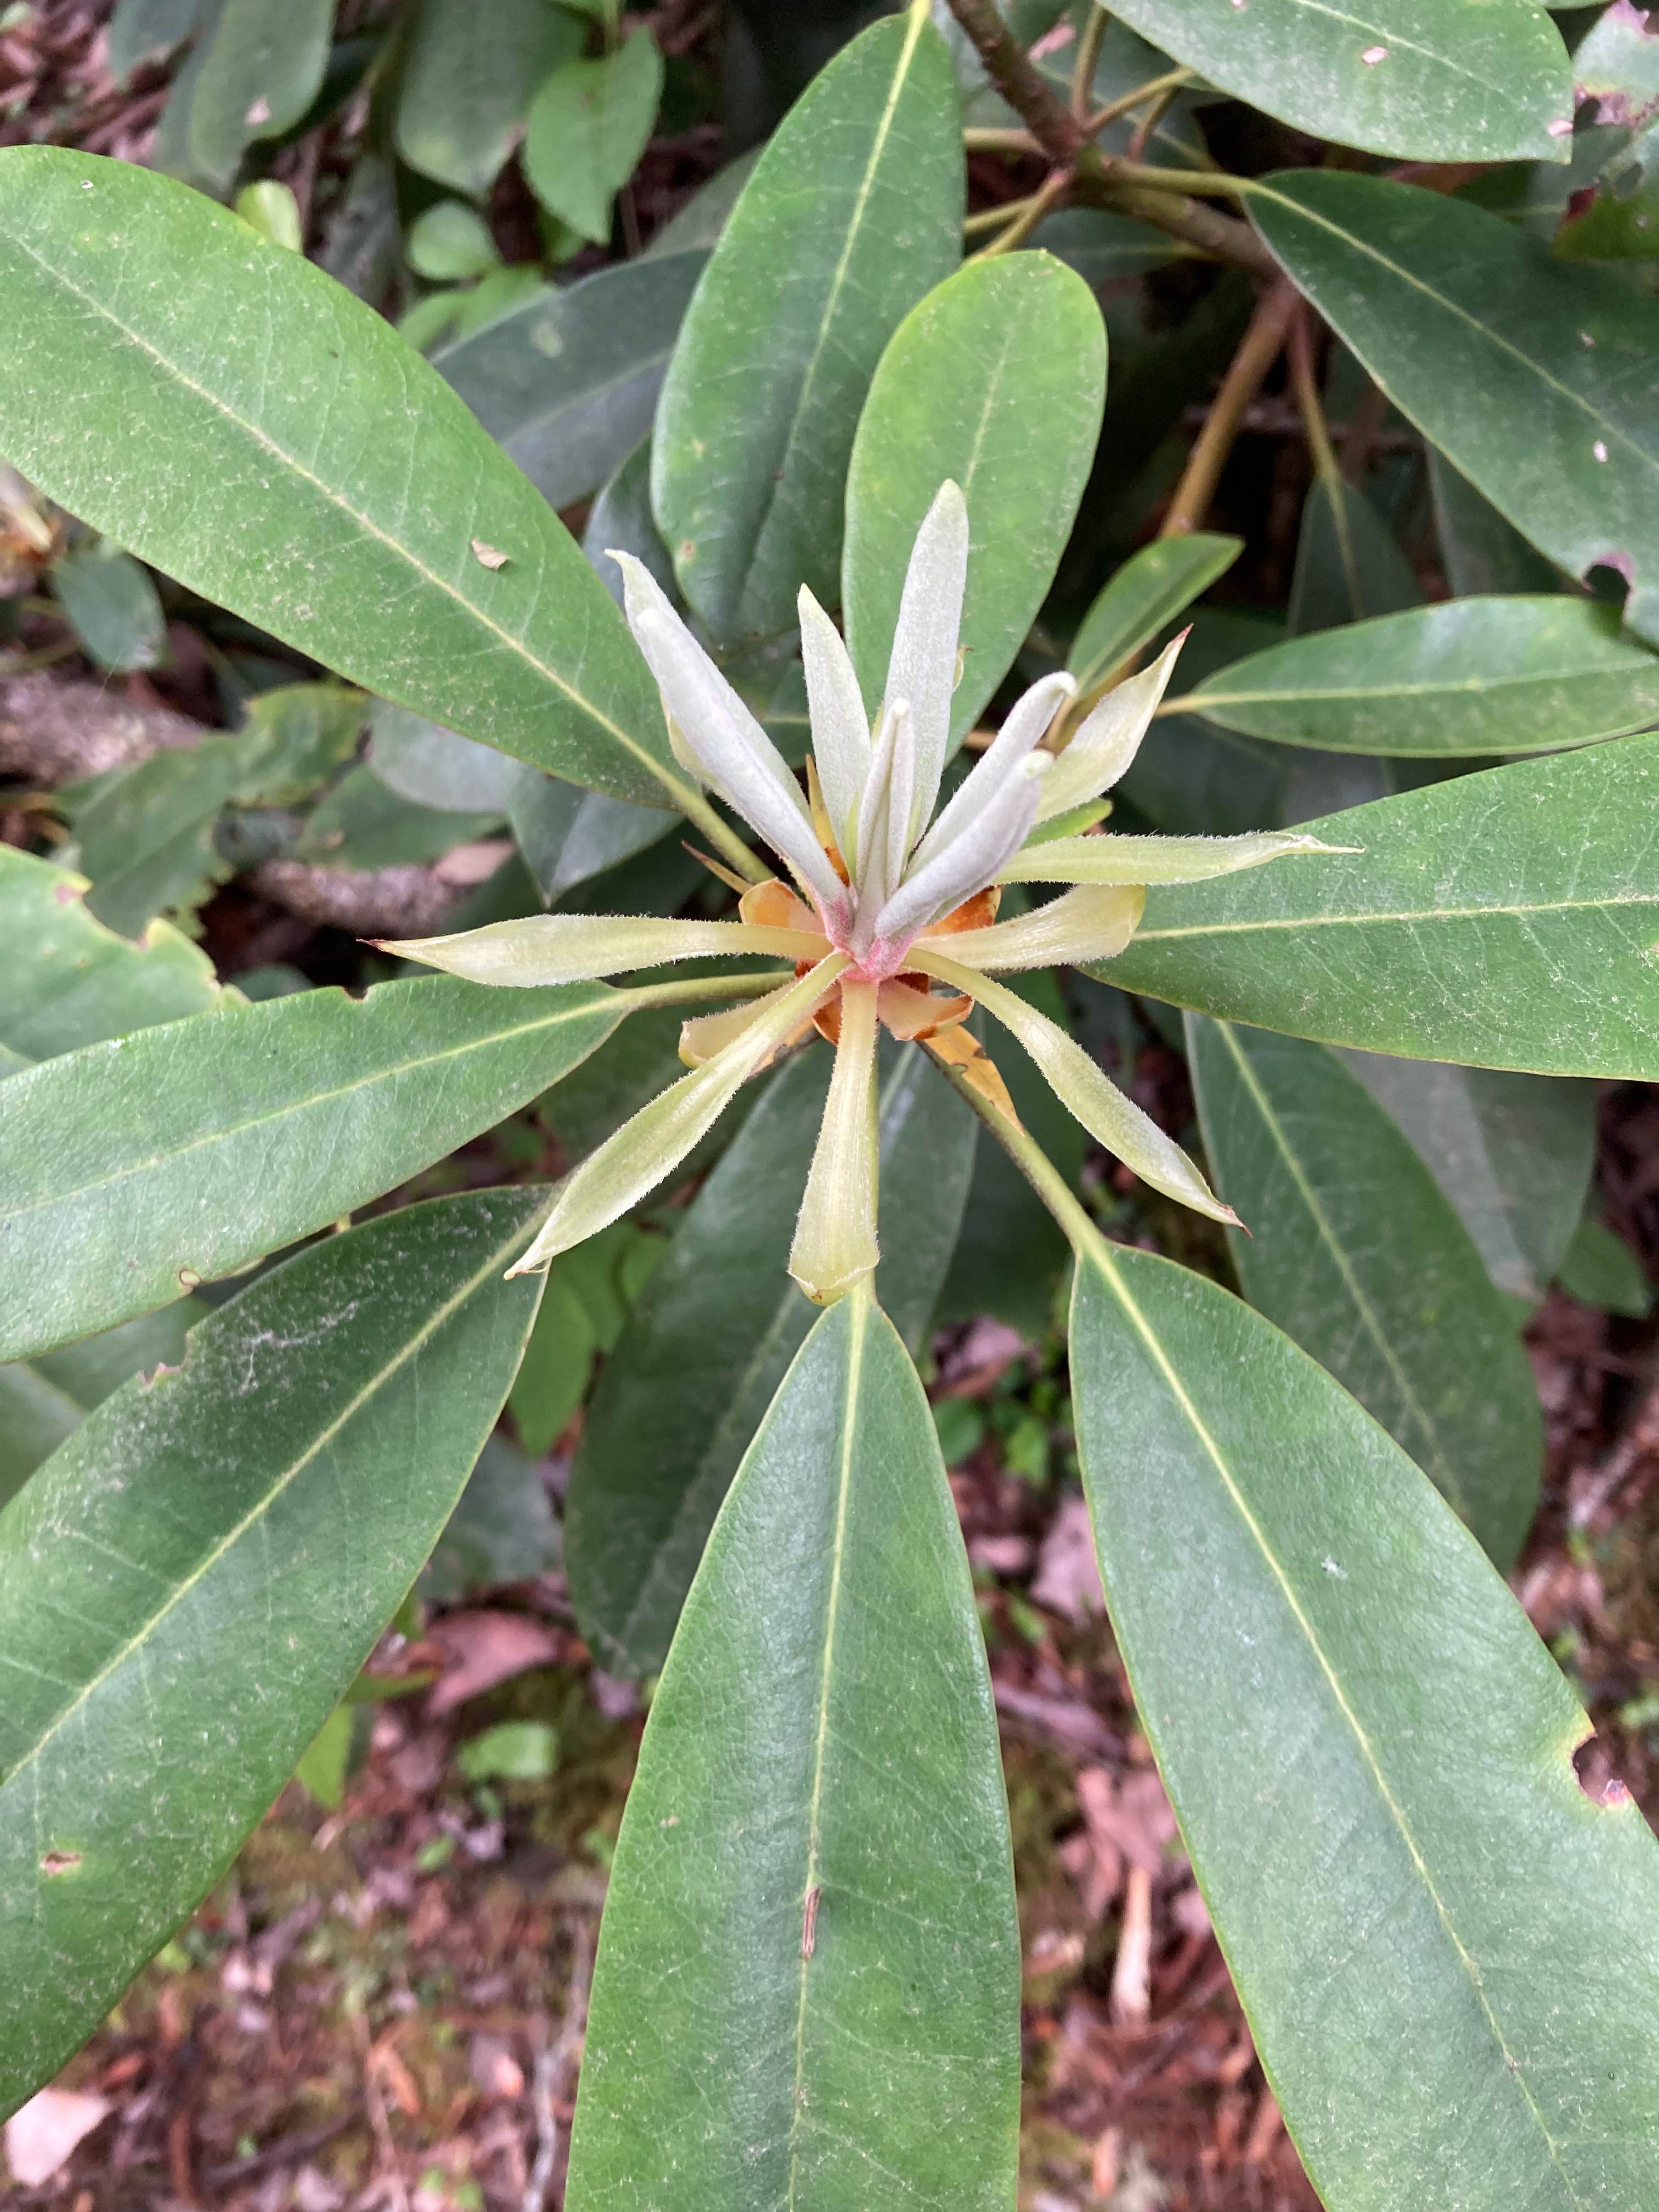 The Scientific Name is Rhododendron maximum. You will likely hear them called Great Rhododendron, Rosebay Rhododendron. This picture shows the The new growth in the spring, before the flowers open, are also very attractive. of Rhododendron maximum